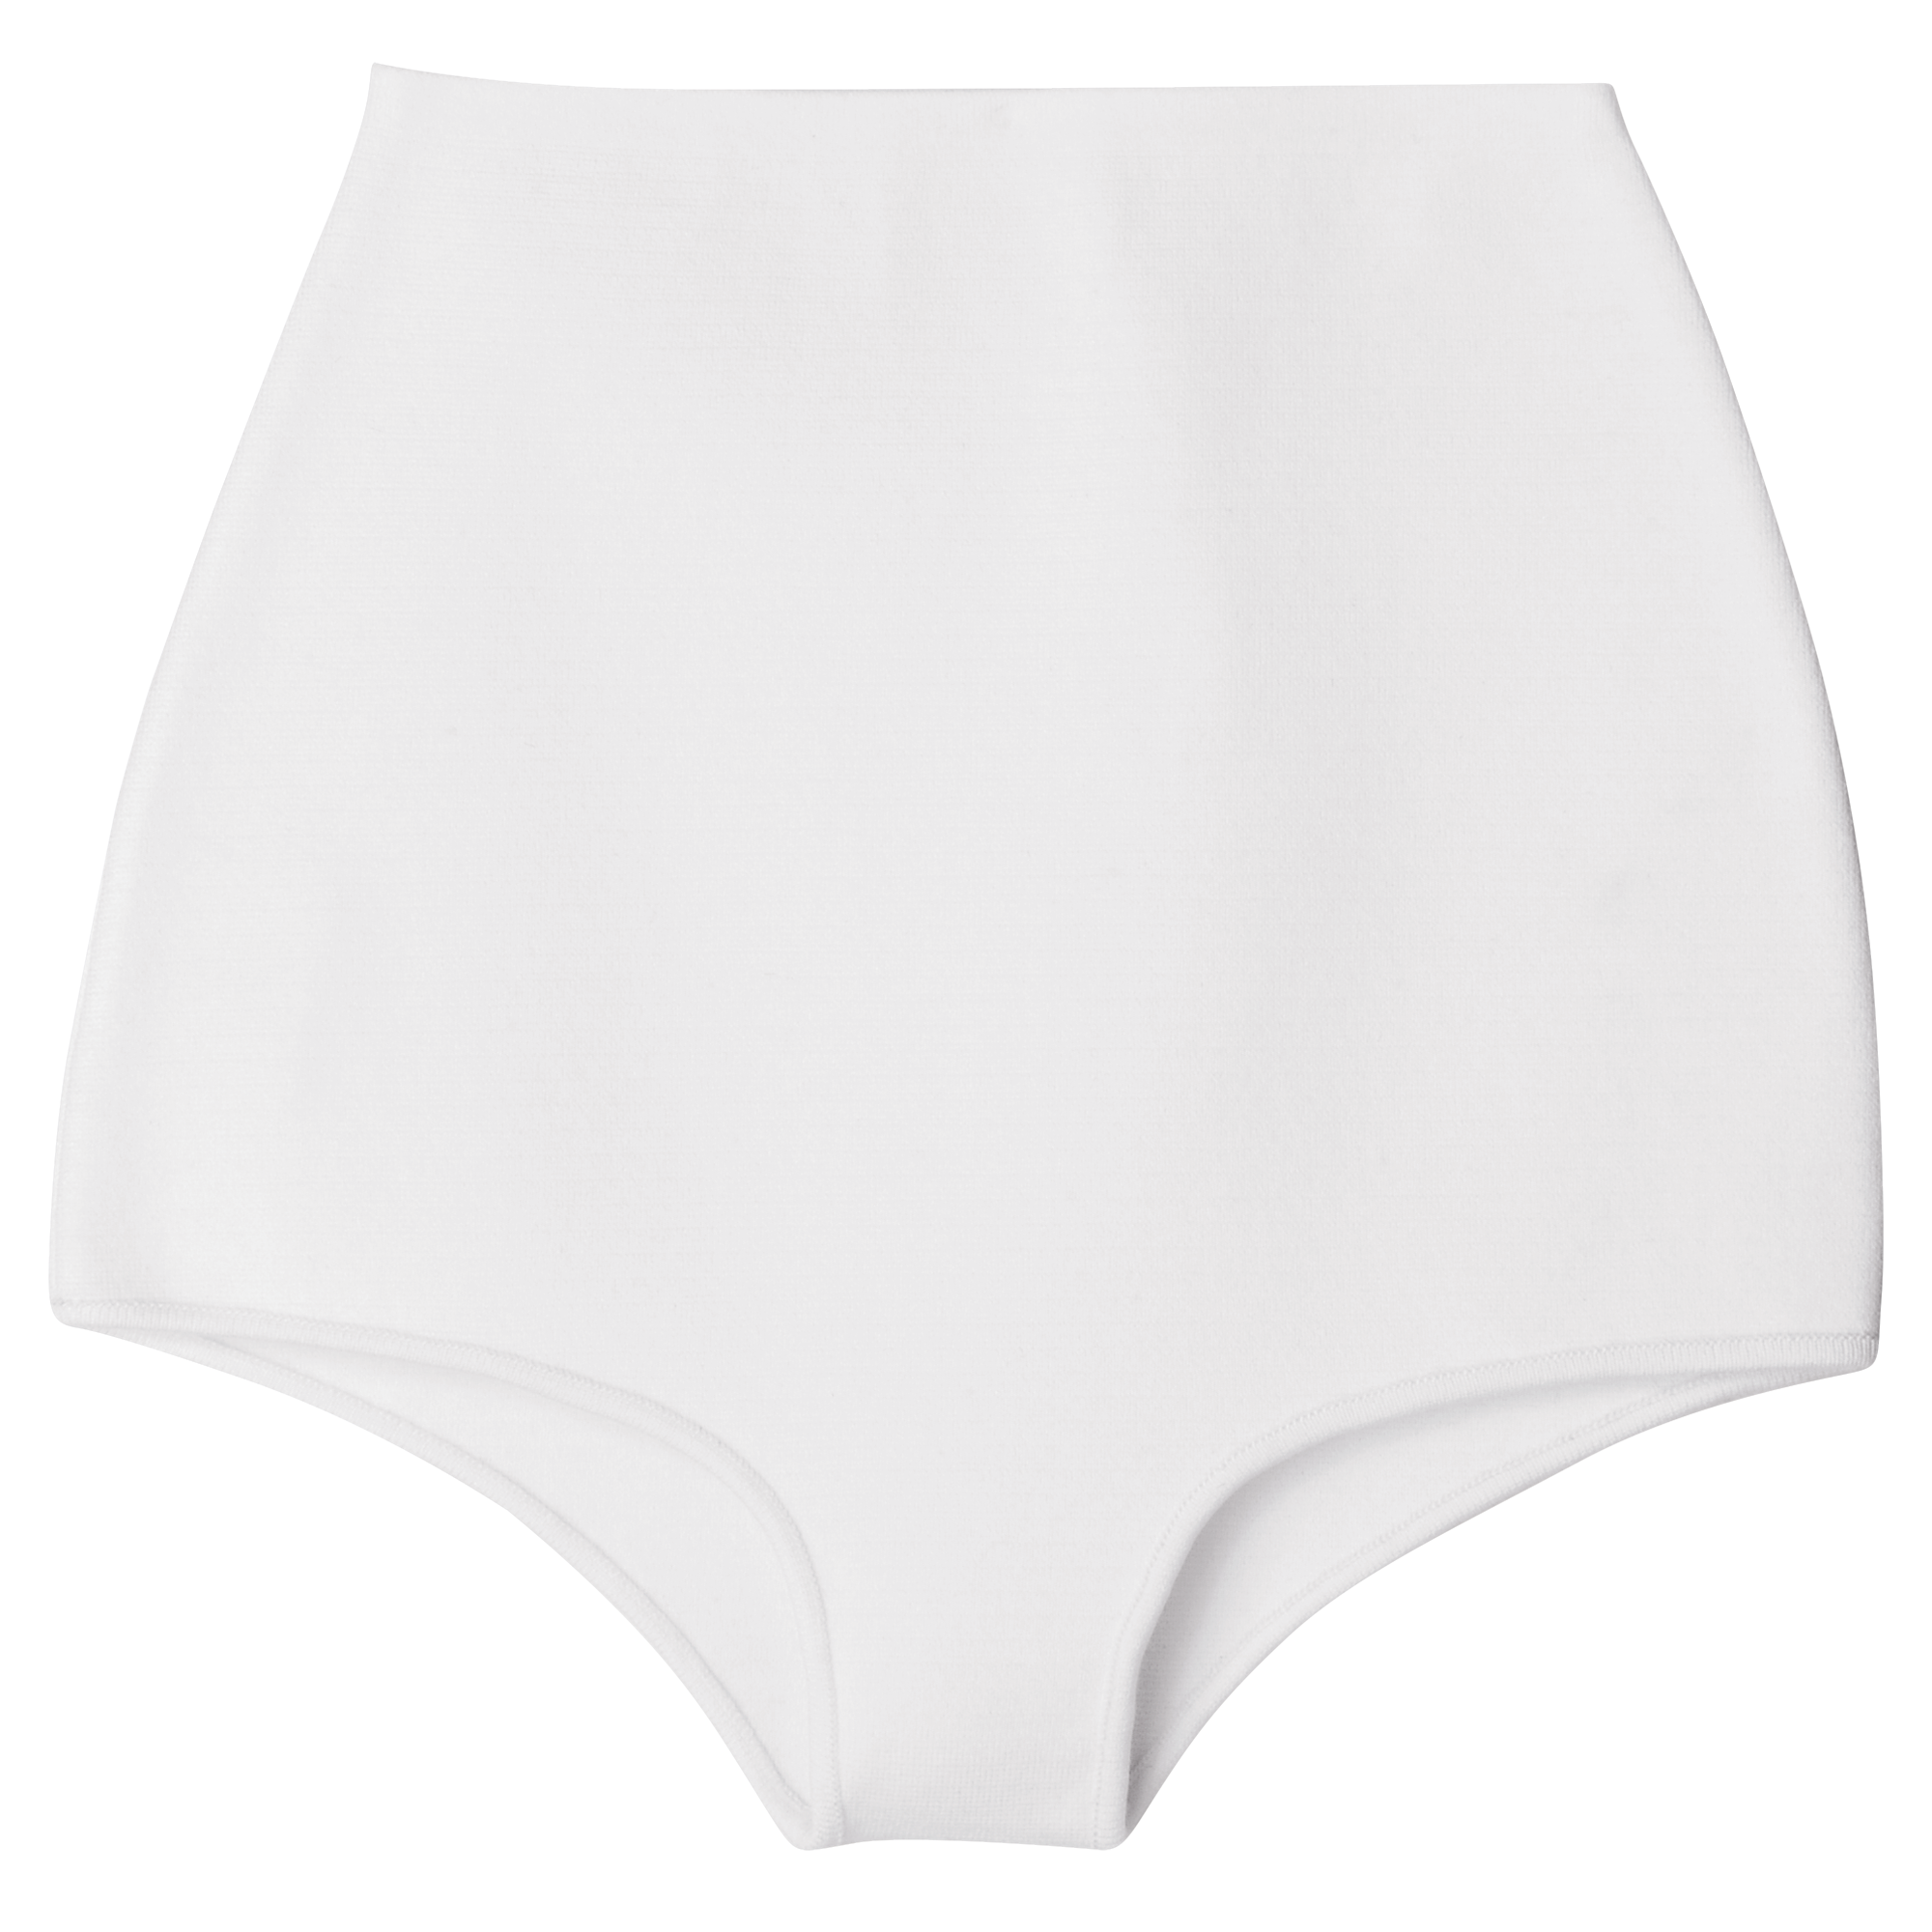 null Panty met hoge taille, Wit